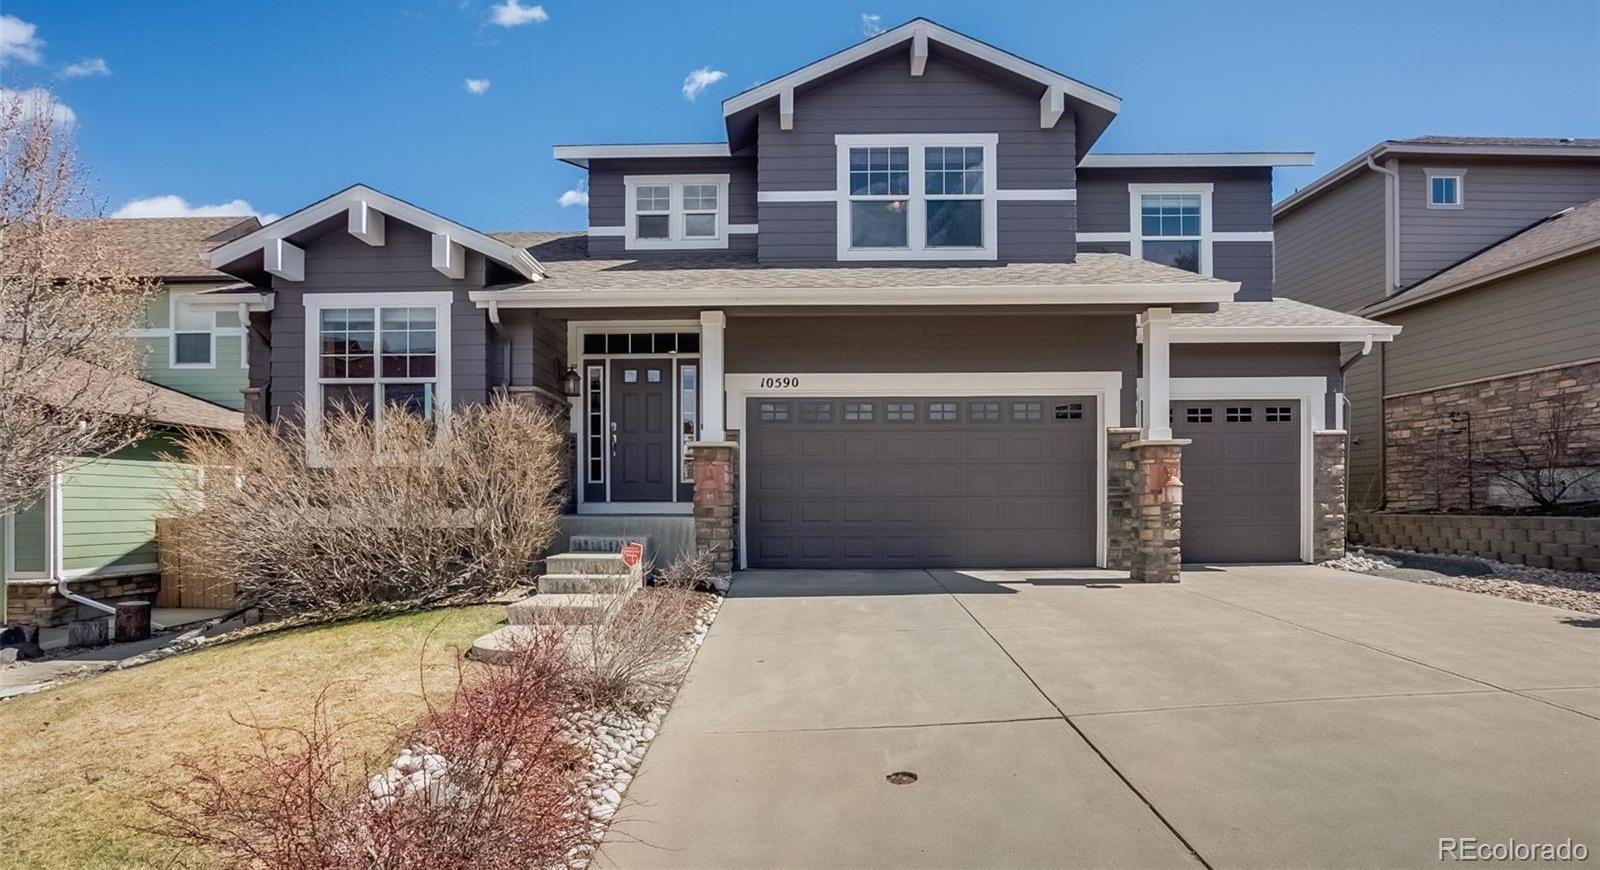 Photo one of 10590 Stonington St Highlands Ranch CO 80126 | MLS 6171777